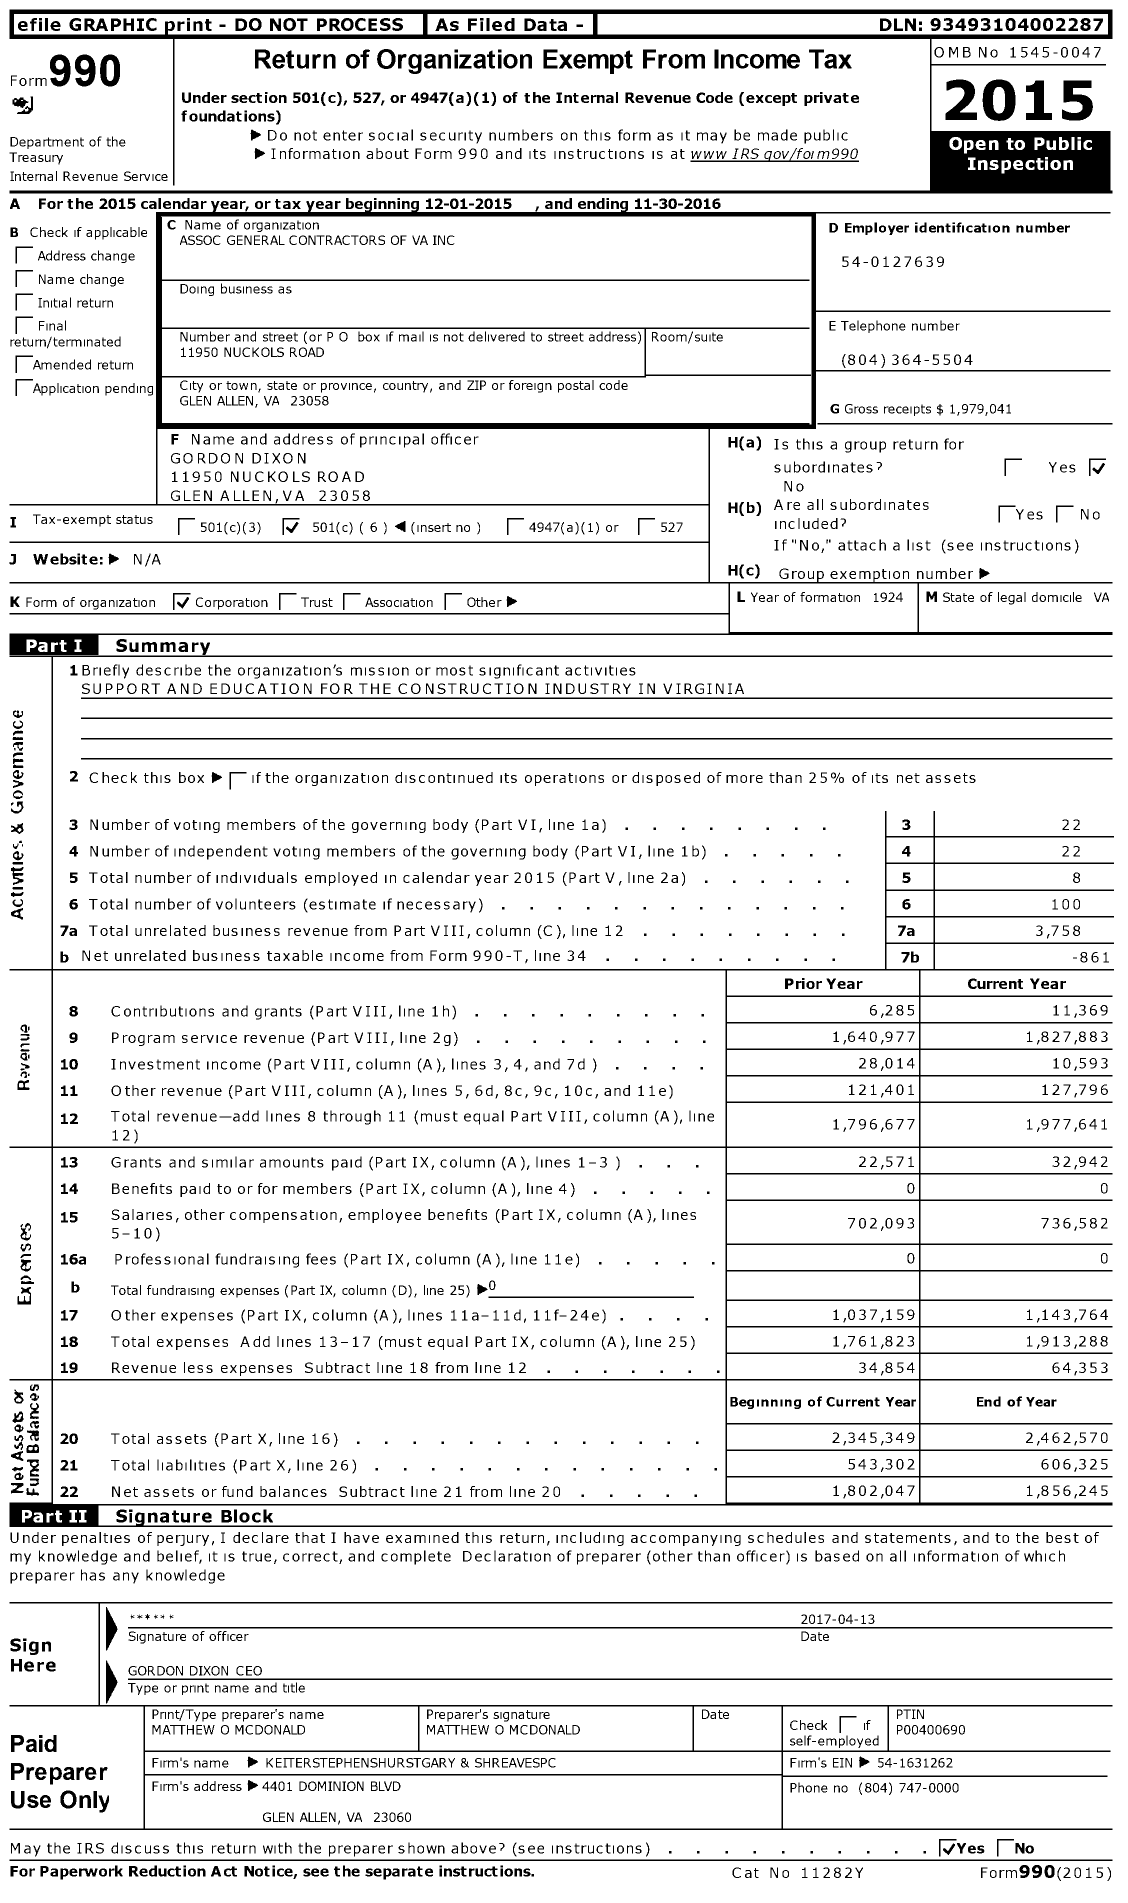 Image of first page of 2015 Form 990O for Association General Contractors of Va (AGC)